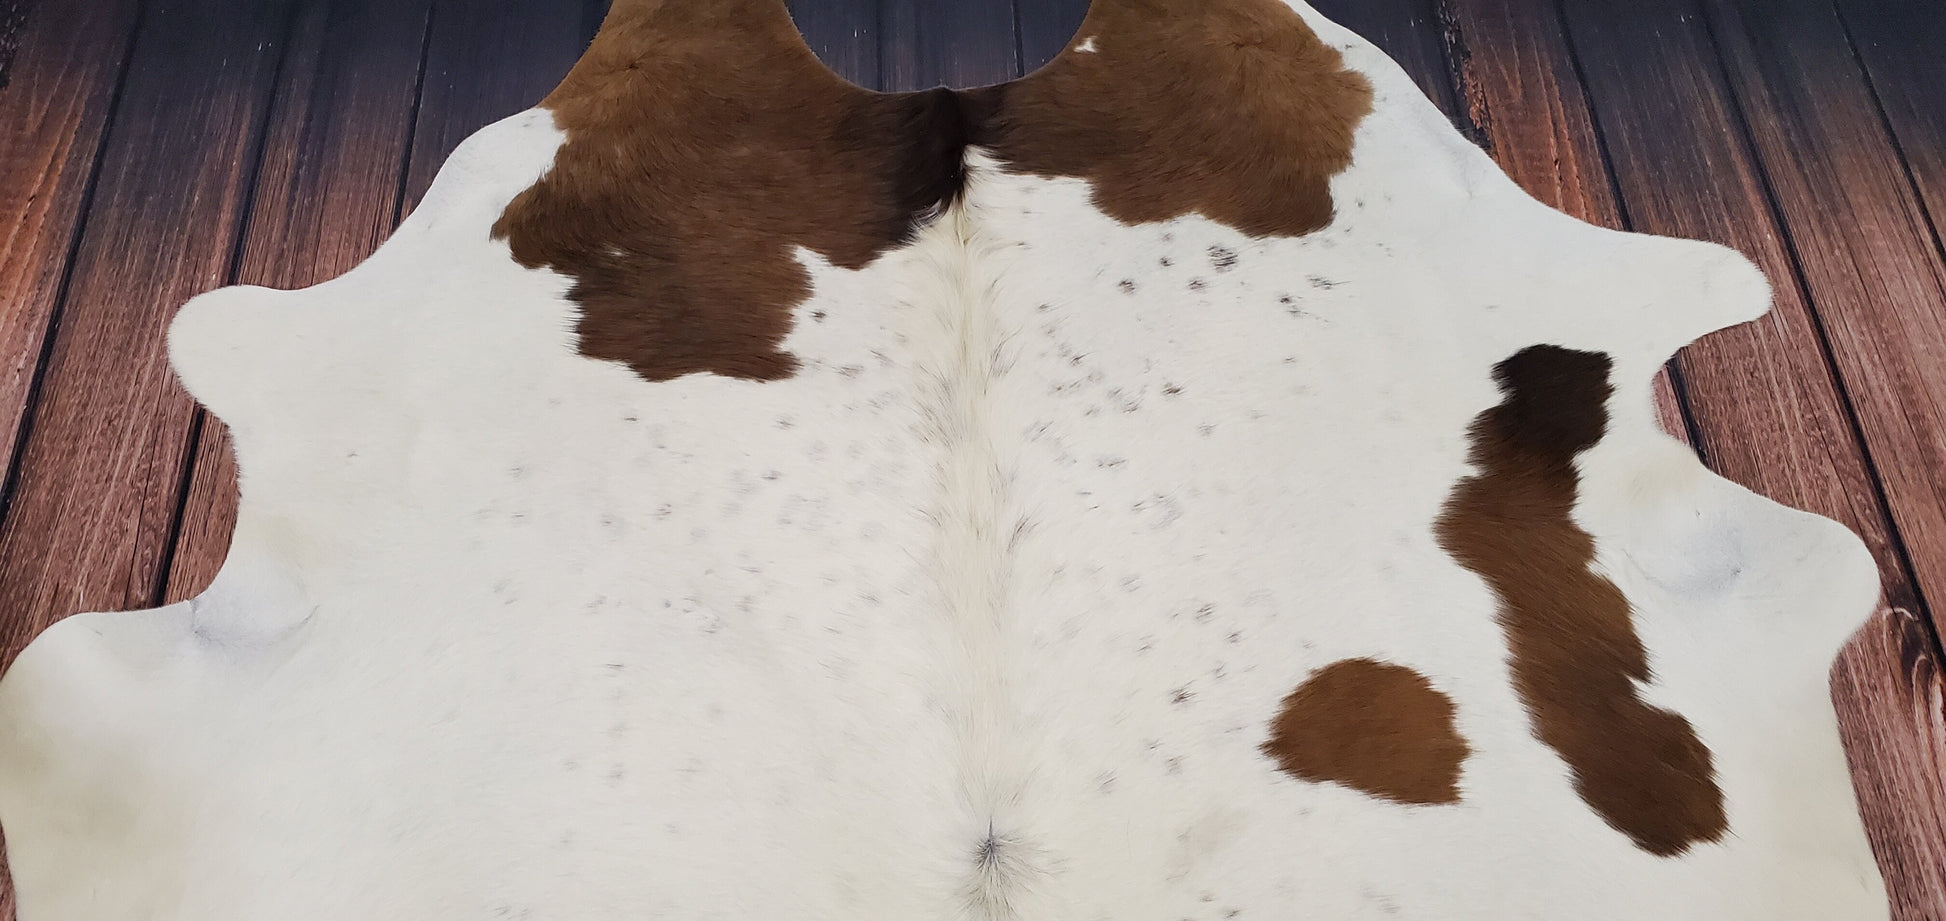 Add a unique touch to your home with this beautiful natural cowhide rug from the plains of Texas. Its brown and white coloring will bring a warm and inviting feel to any room.